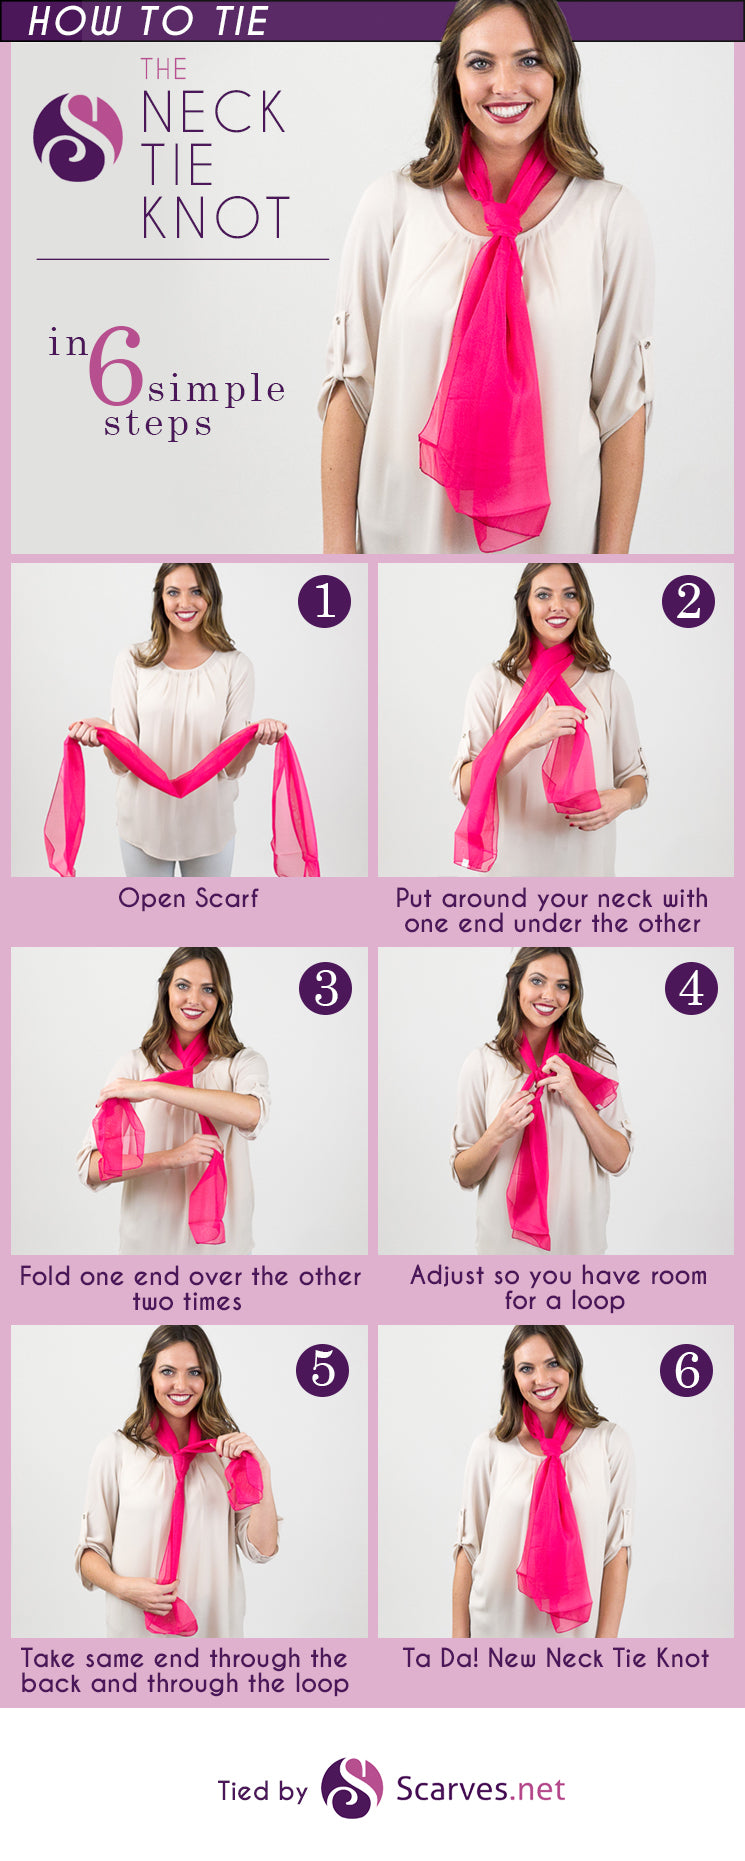 Neck Tie Knot in 6 simple steps